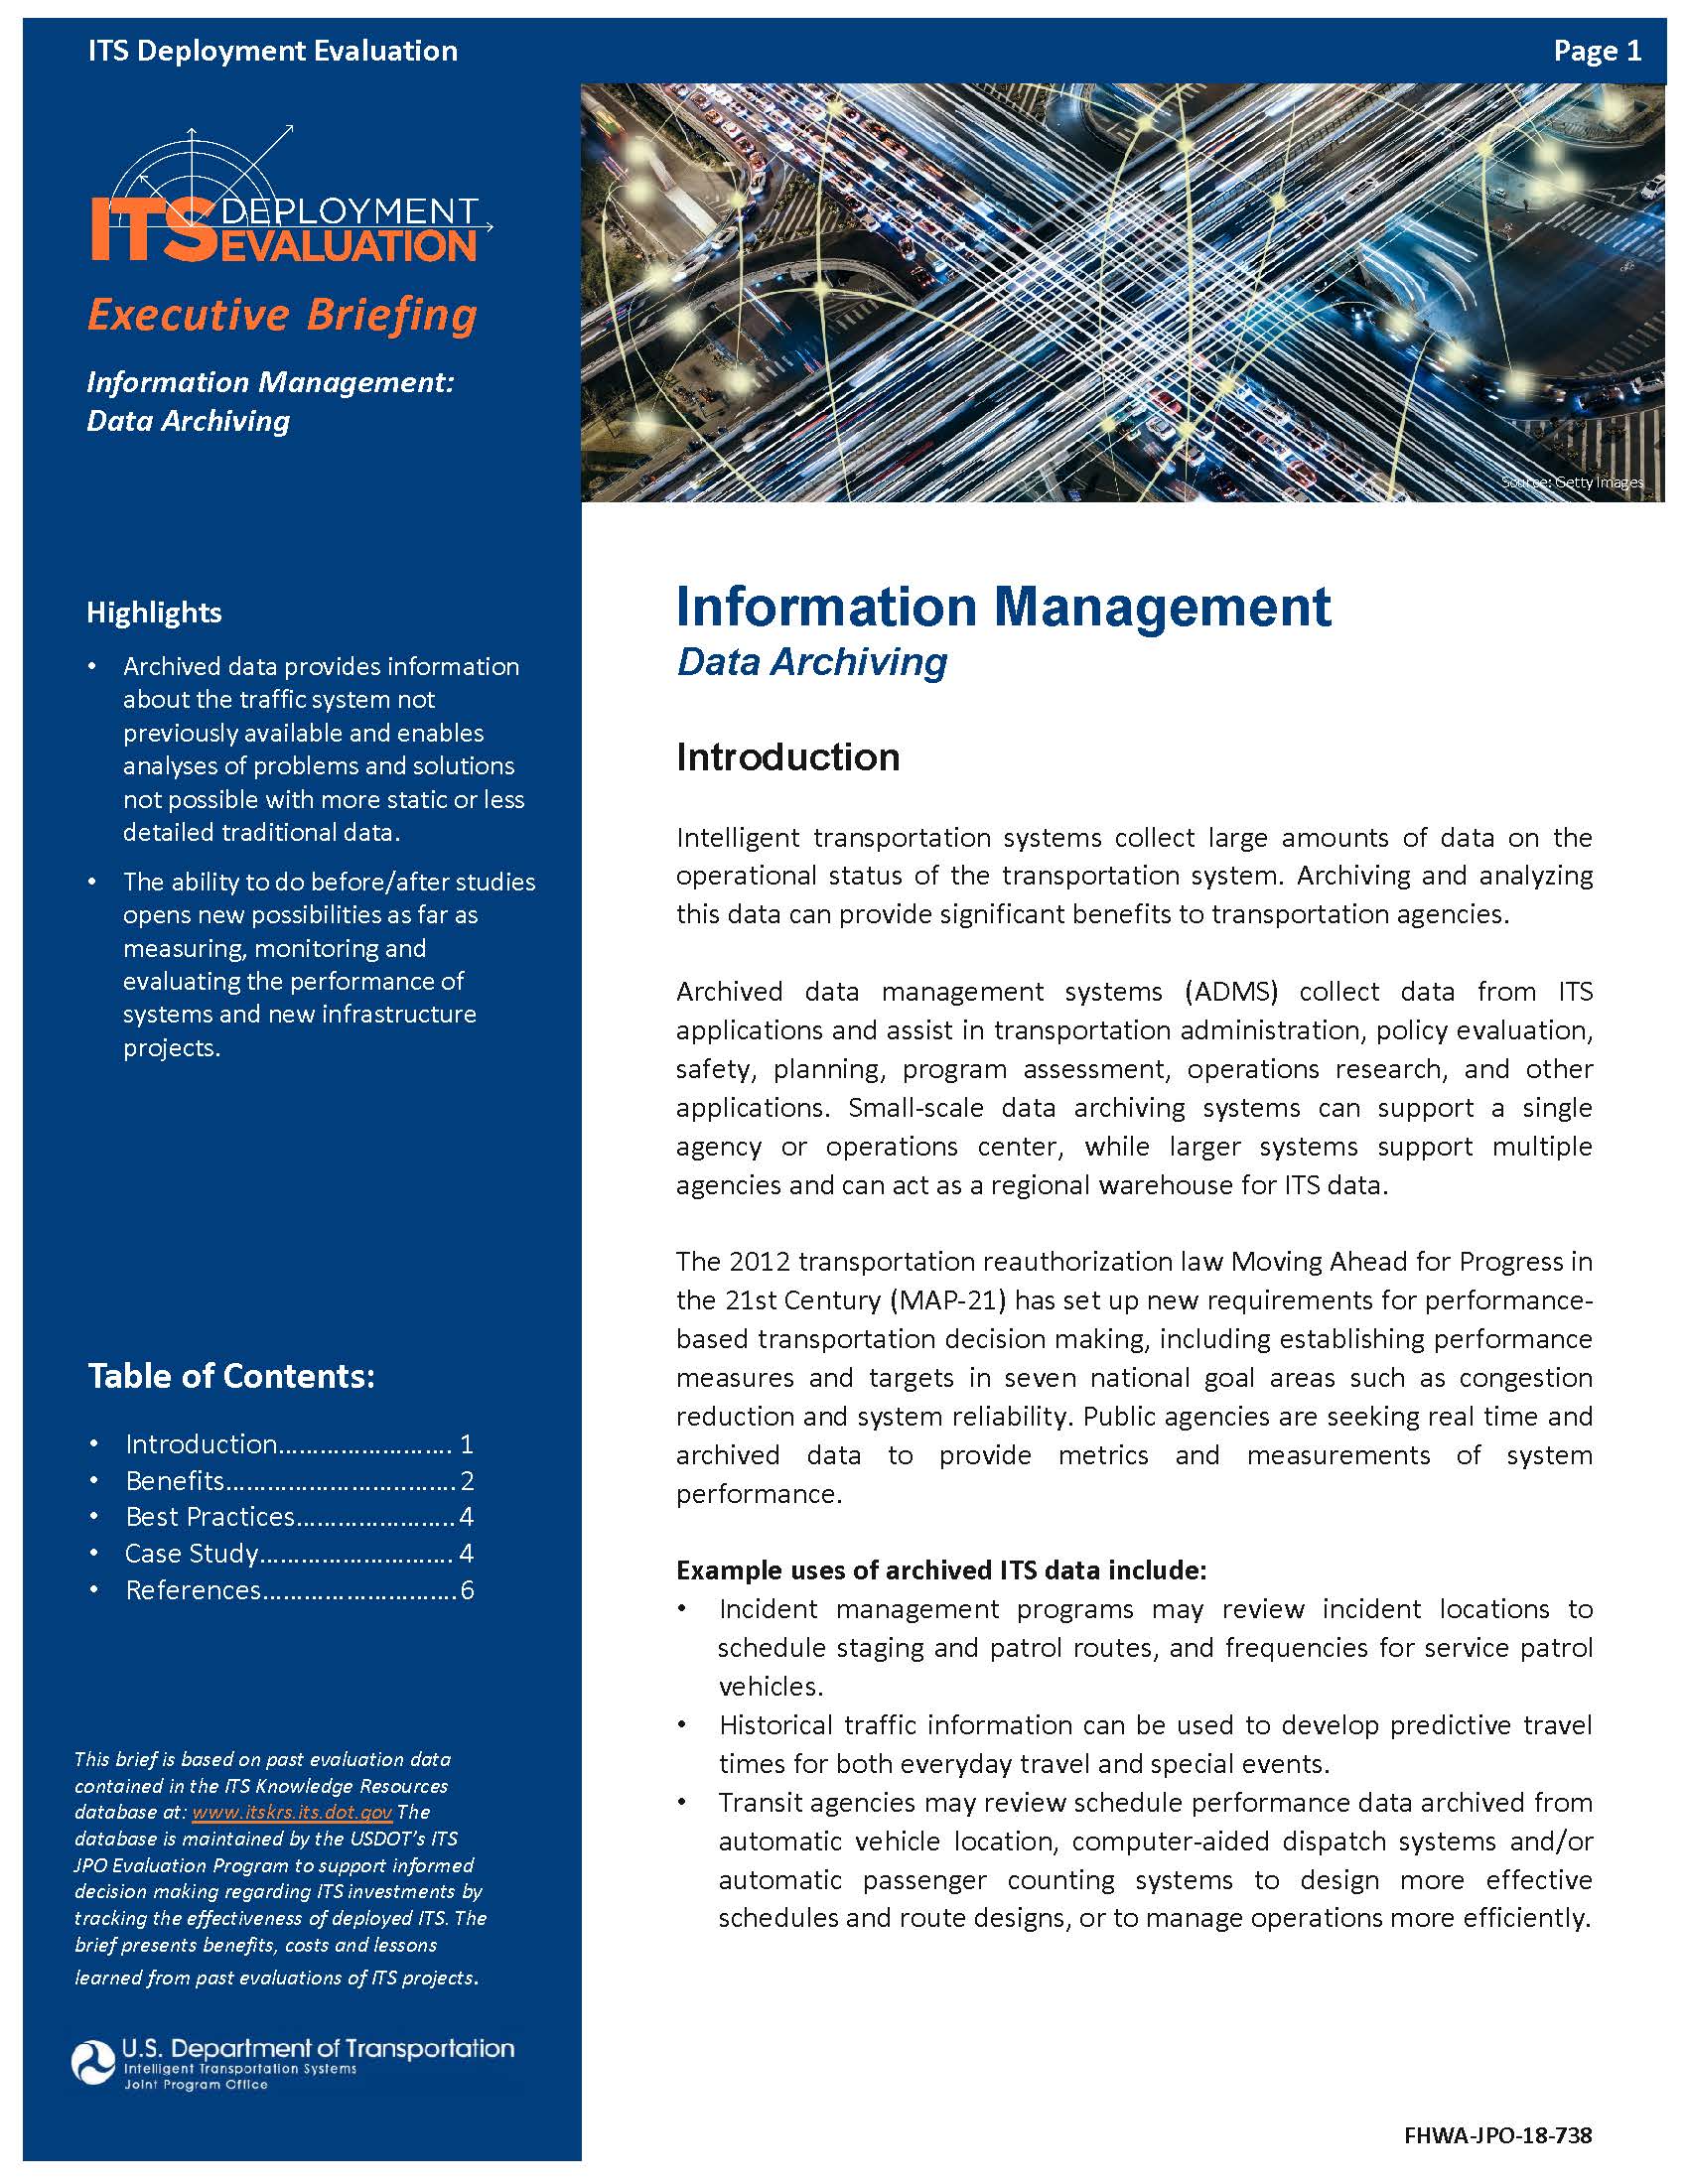 Cover Page of the Information Management: Data Archiving Executive Briefing